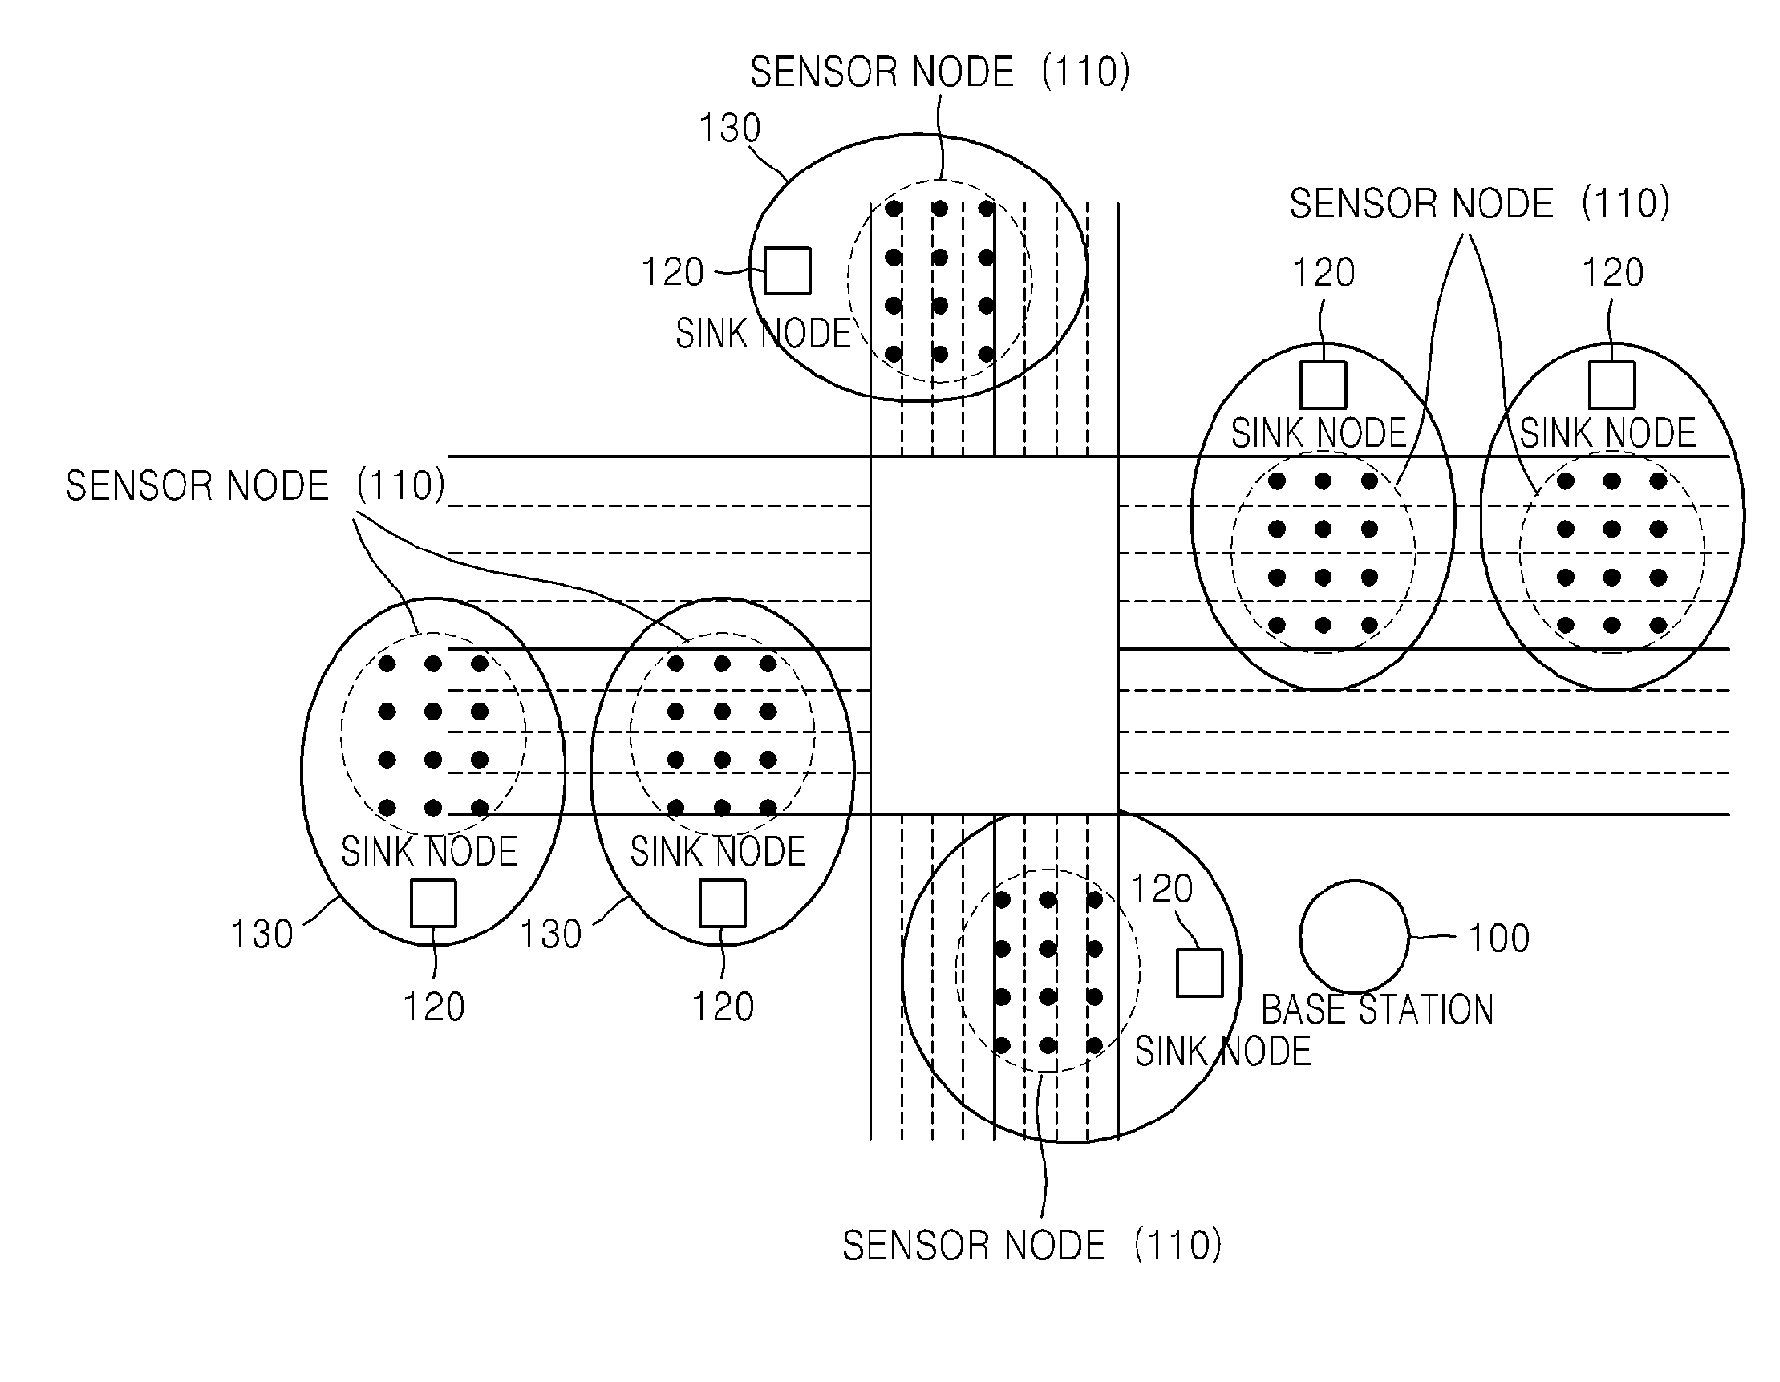 Reliable and low-latency sensor network mac system and method using superframe